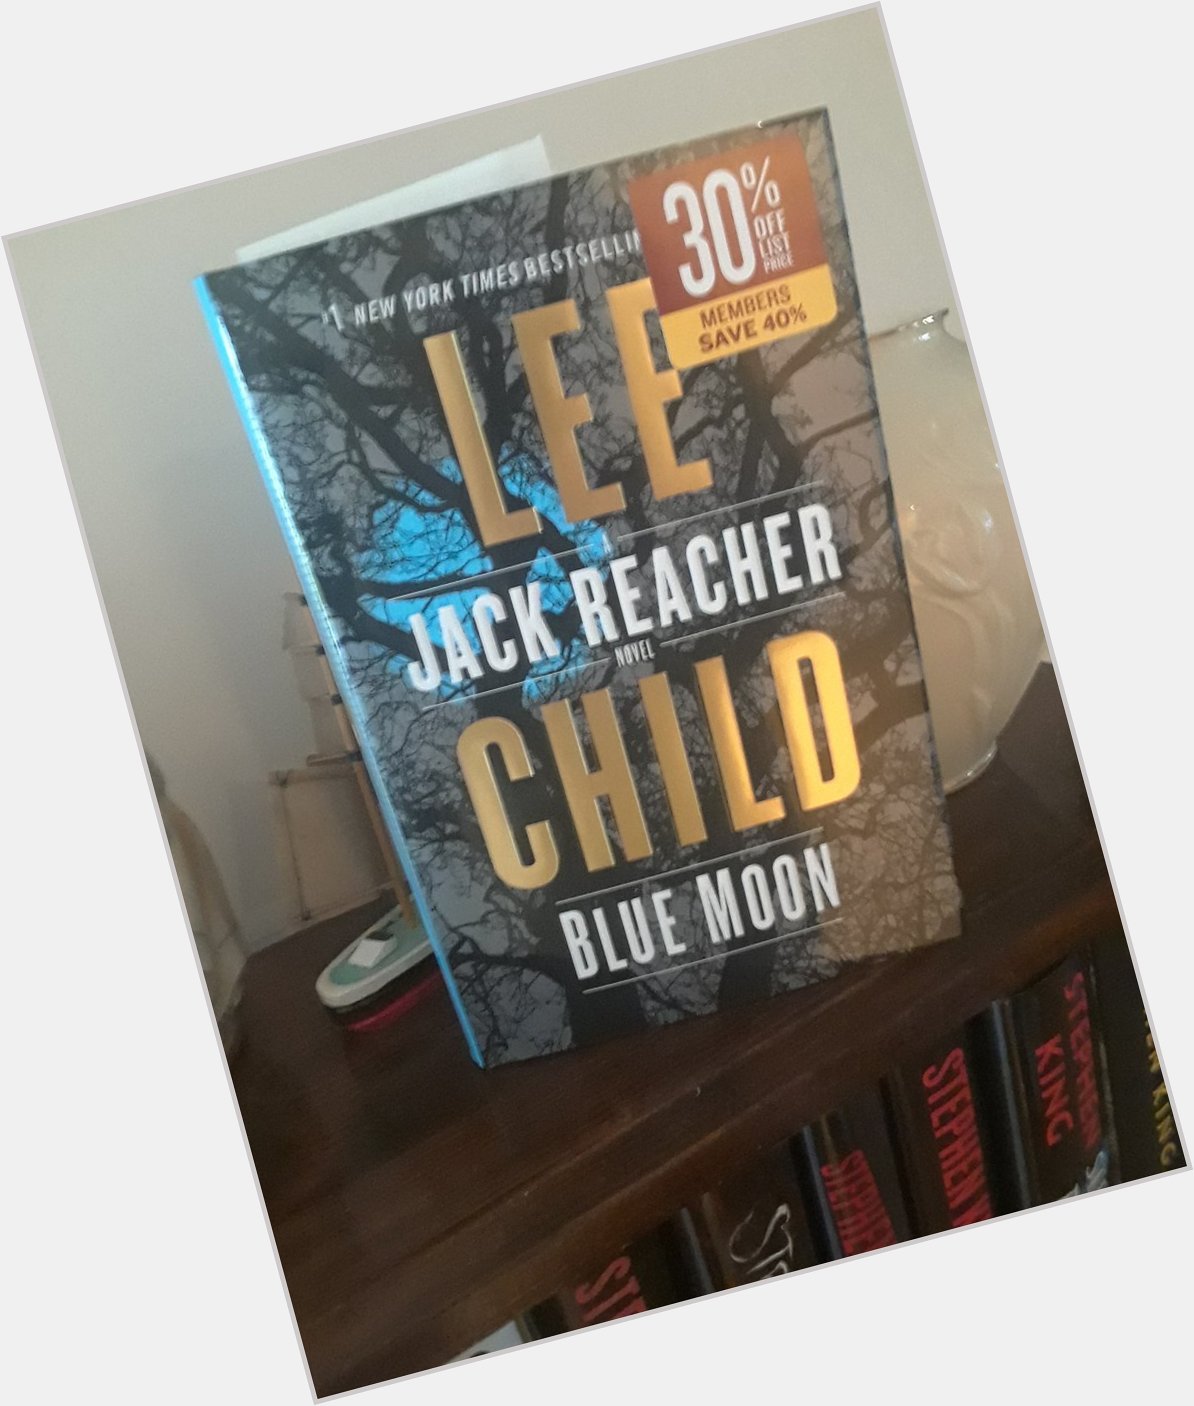 Happy Birthday Lee Child, just pick up the new Jack Reacher book, \Blue Moon \ 